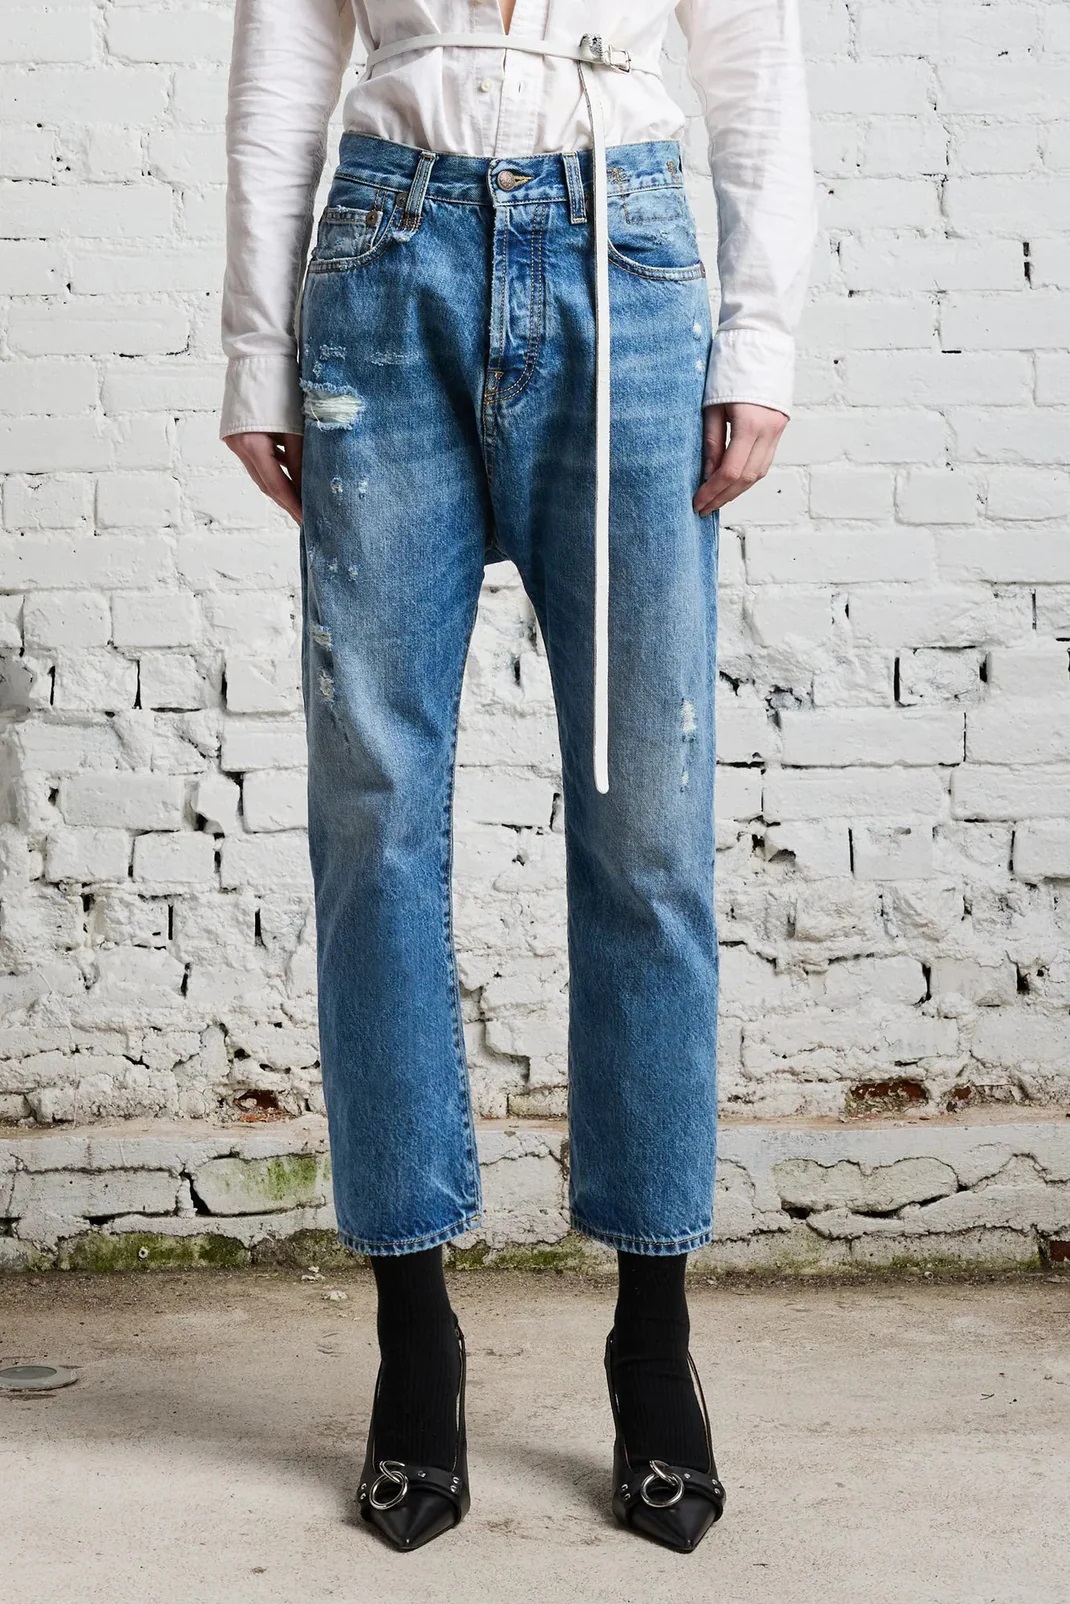 R13 Tailored Drop Jeans in Bain Washing 25